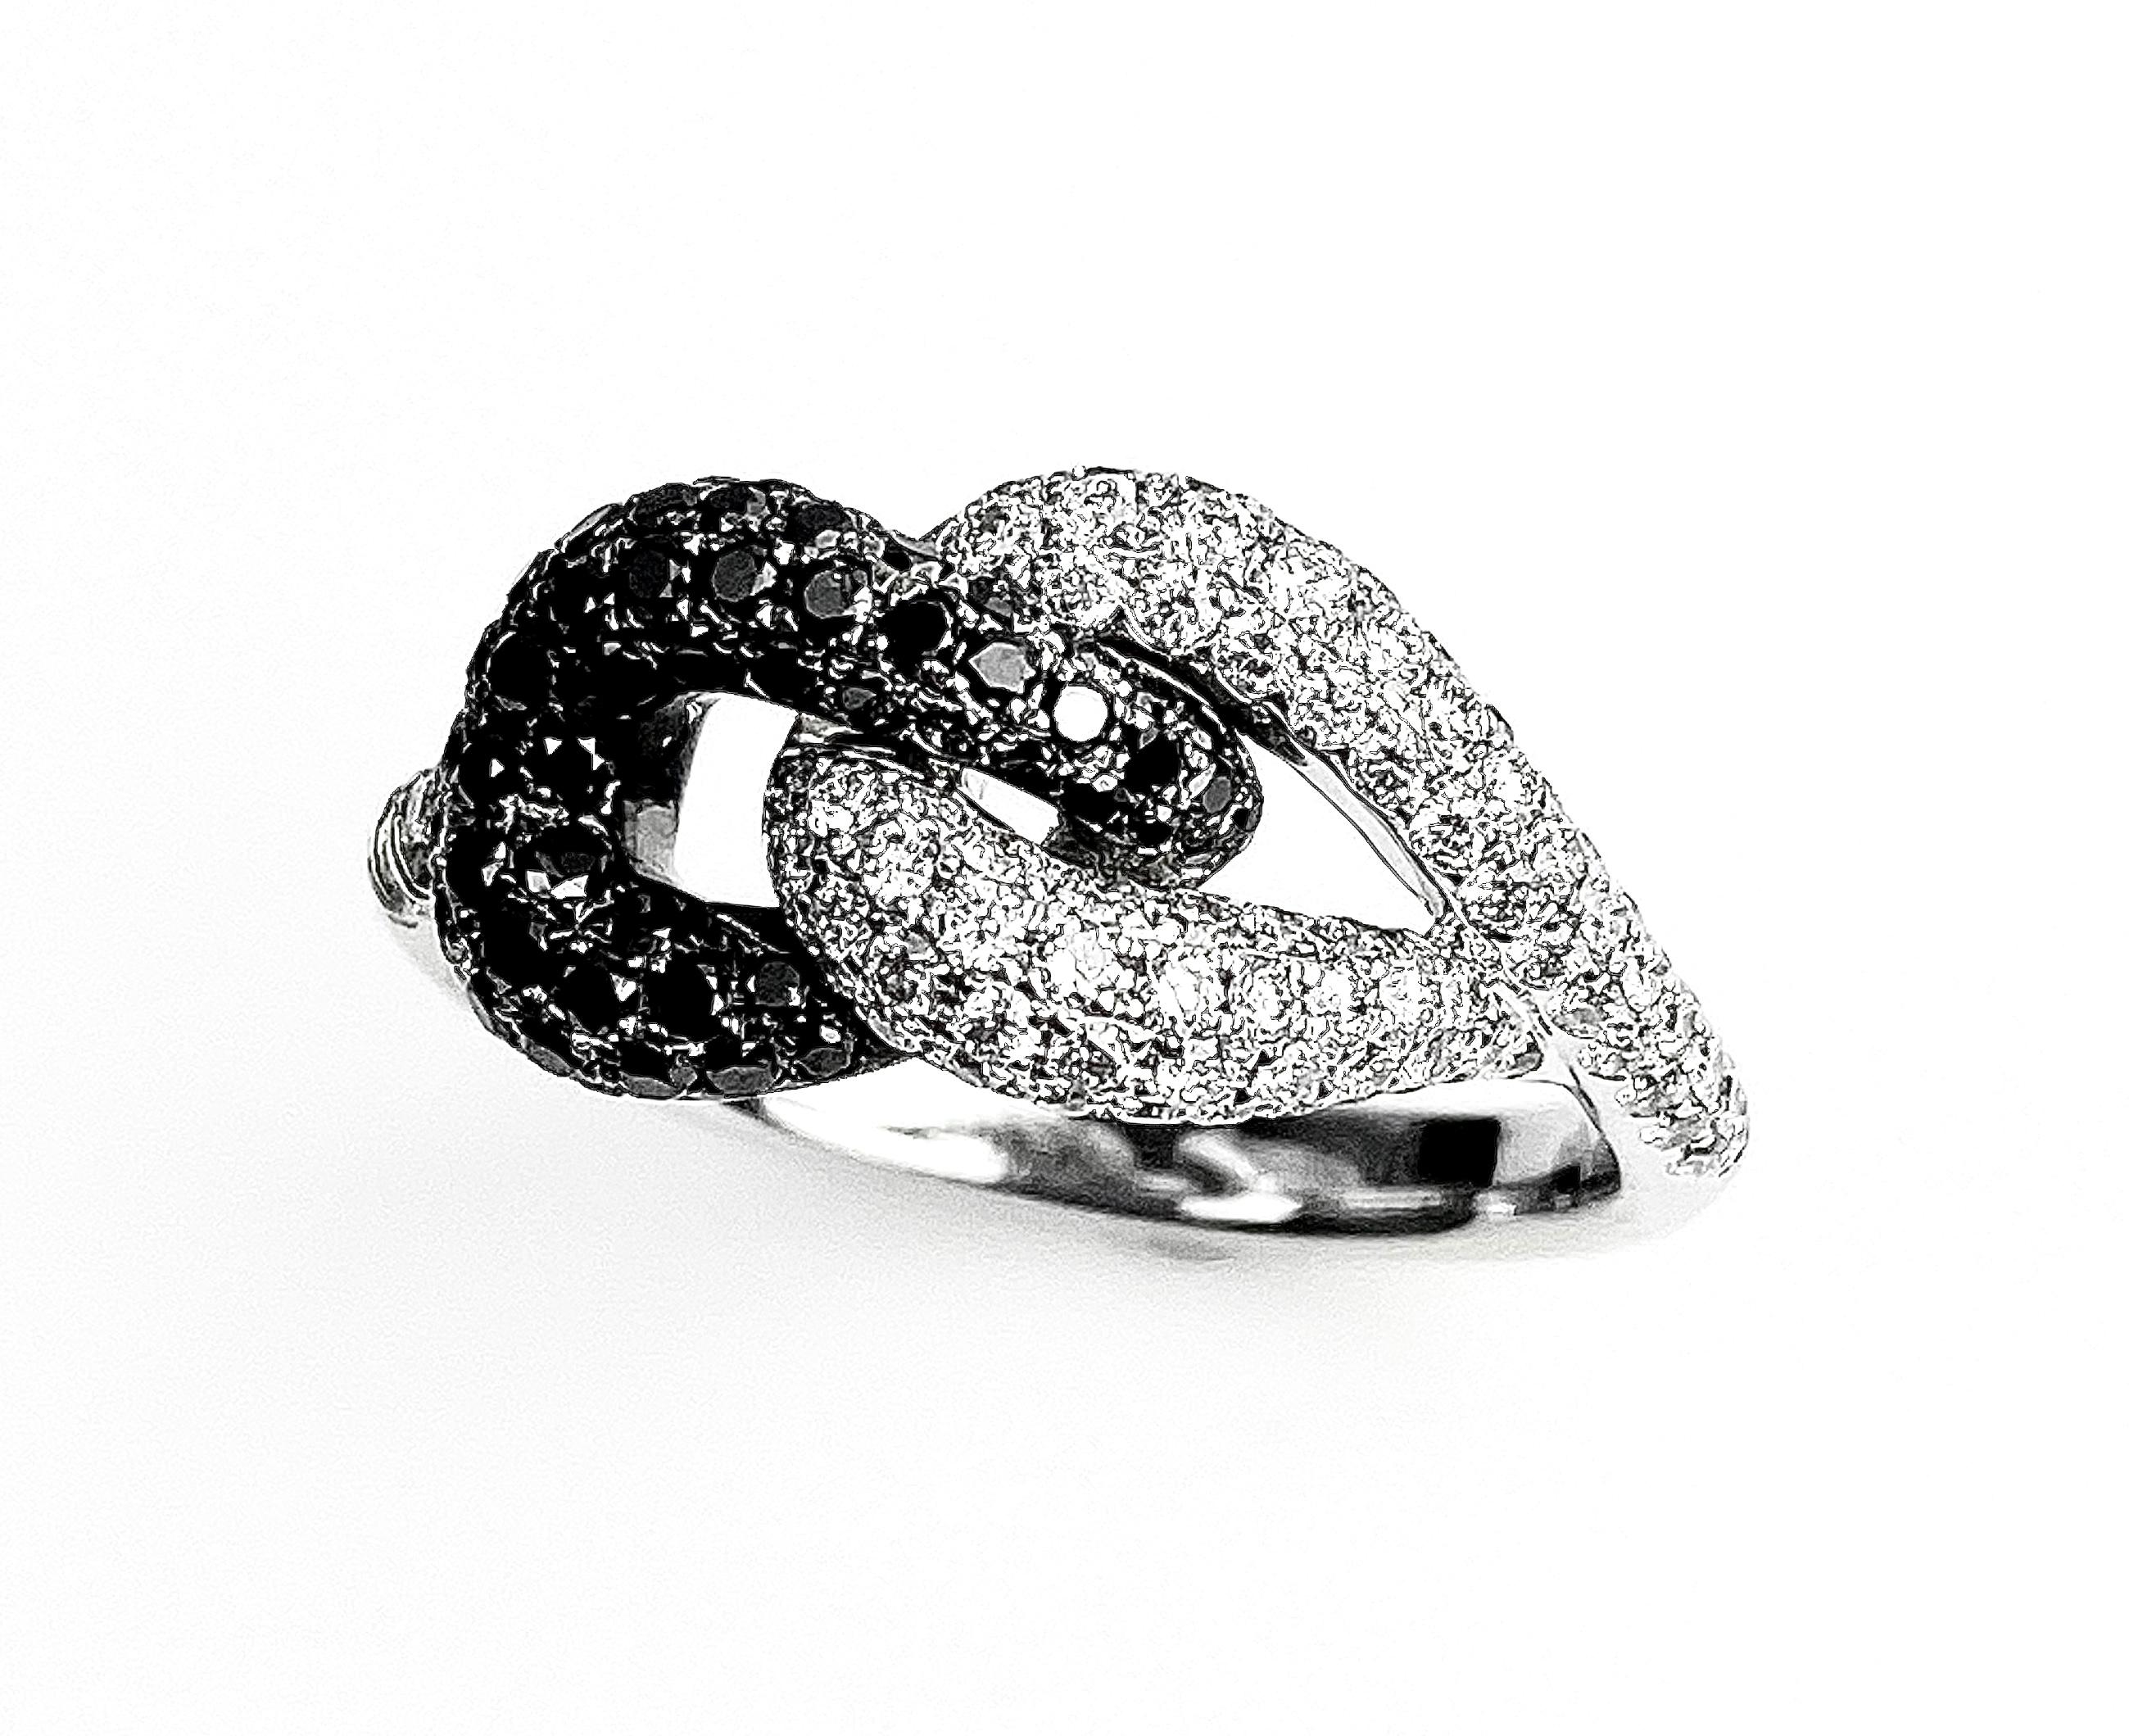 Ladies' knot ring in 18k white gold with 1.03tcw of pavé-set black and white diamonds, size 6 1/2. Resizing up or down 2 sizes included. 